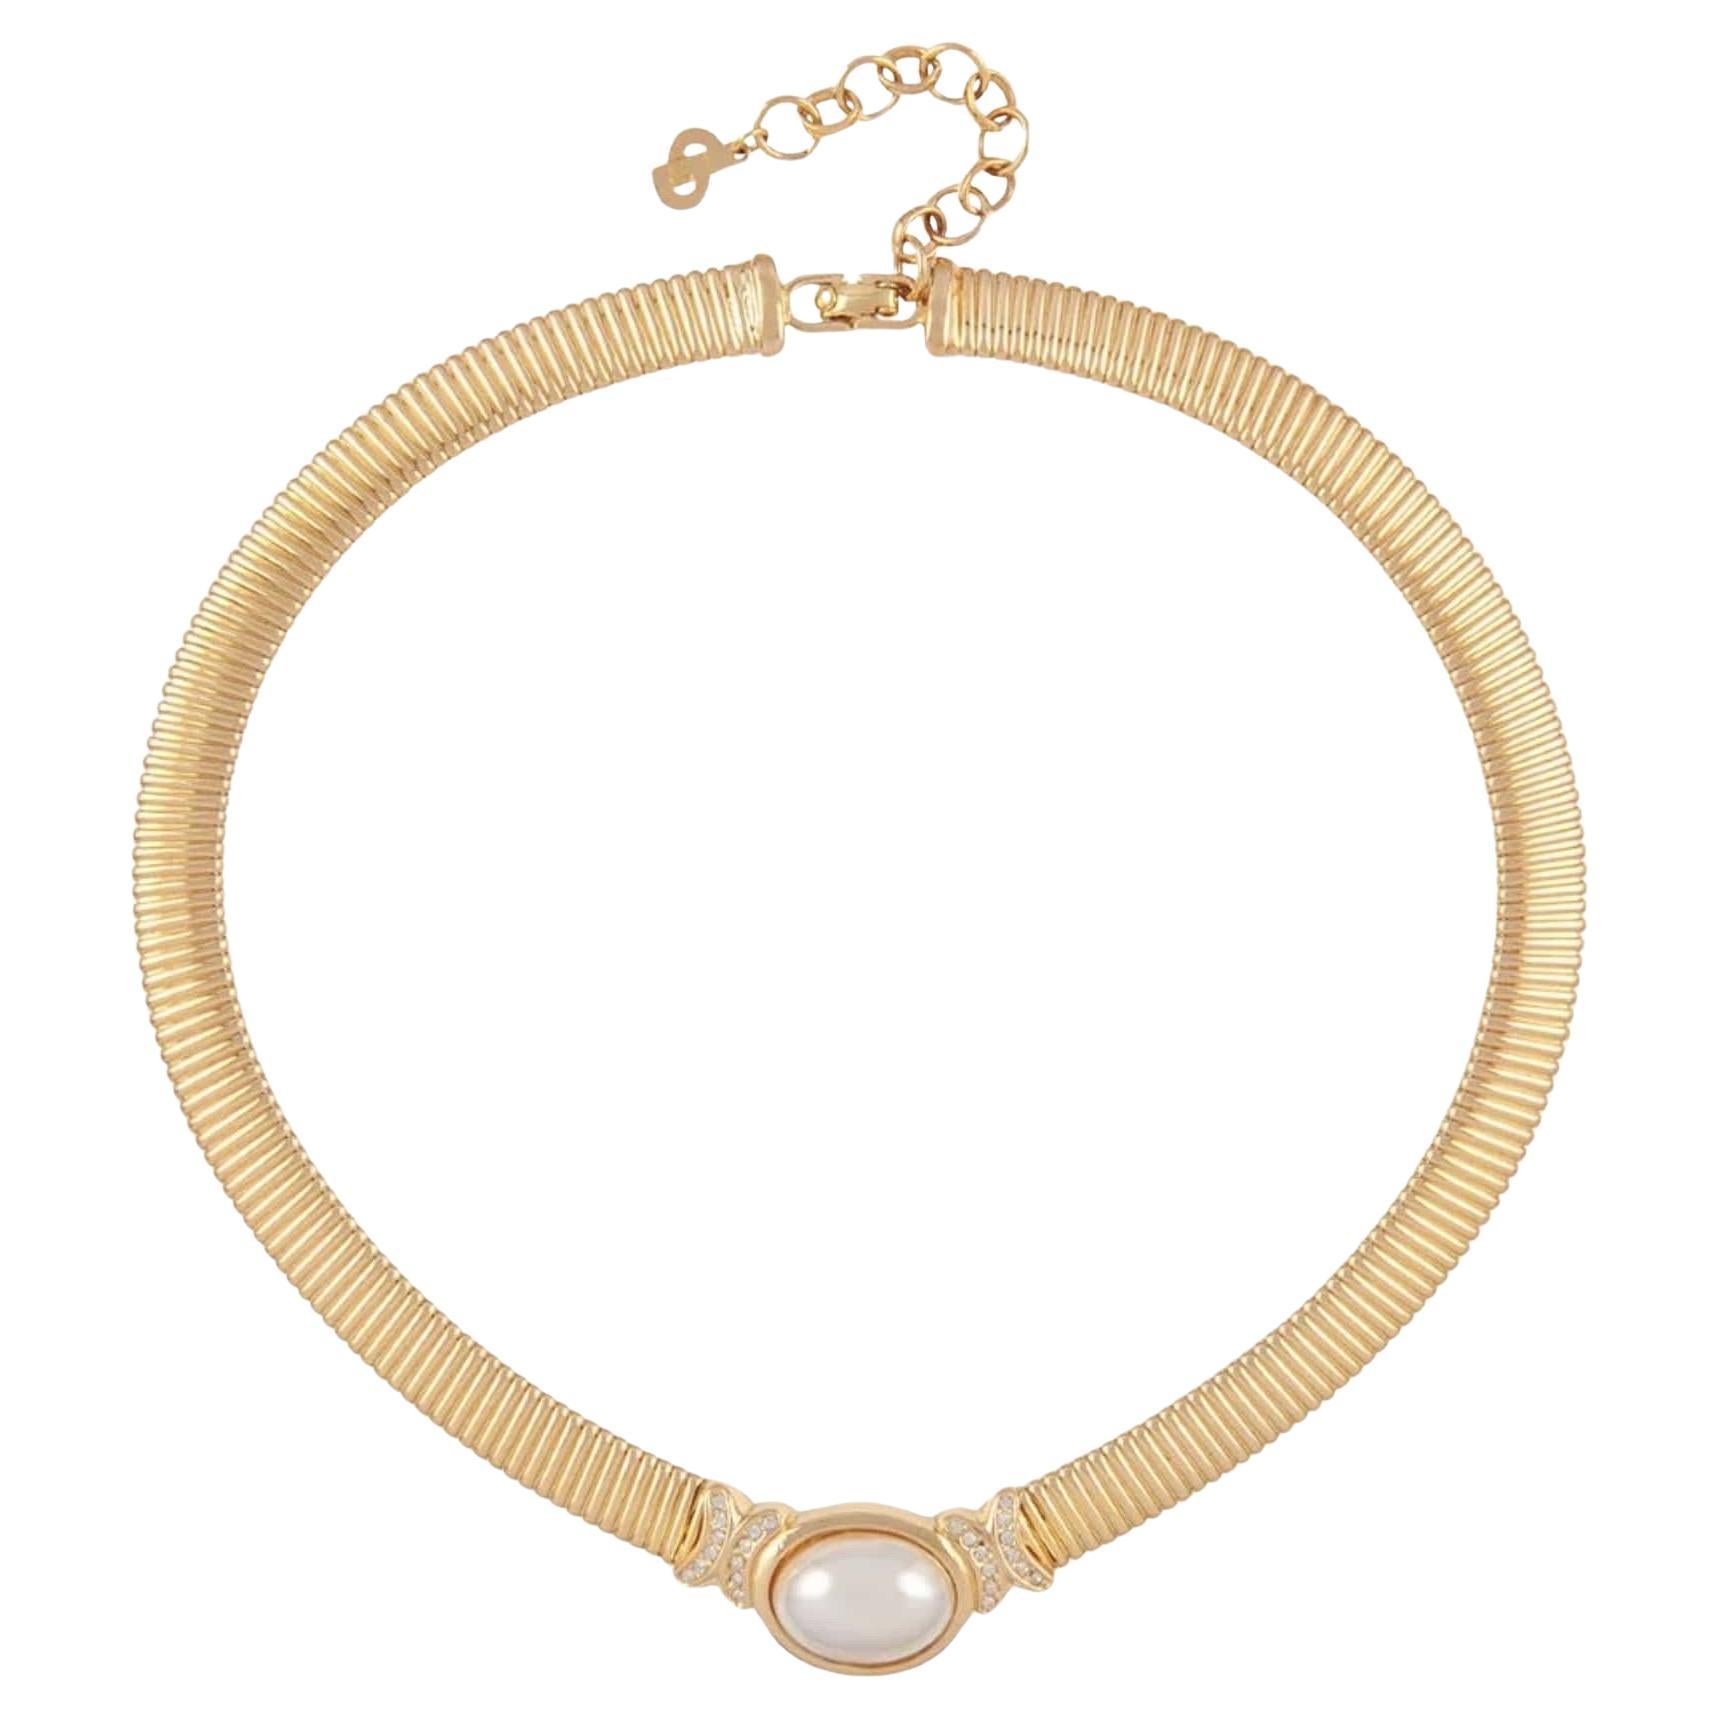 Christian Dior Vintage 1980s Omega Collar Oval Pearl Crystals Gold Necklace